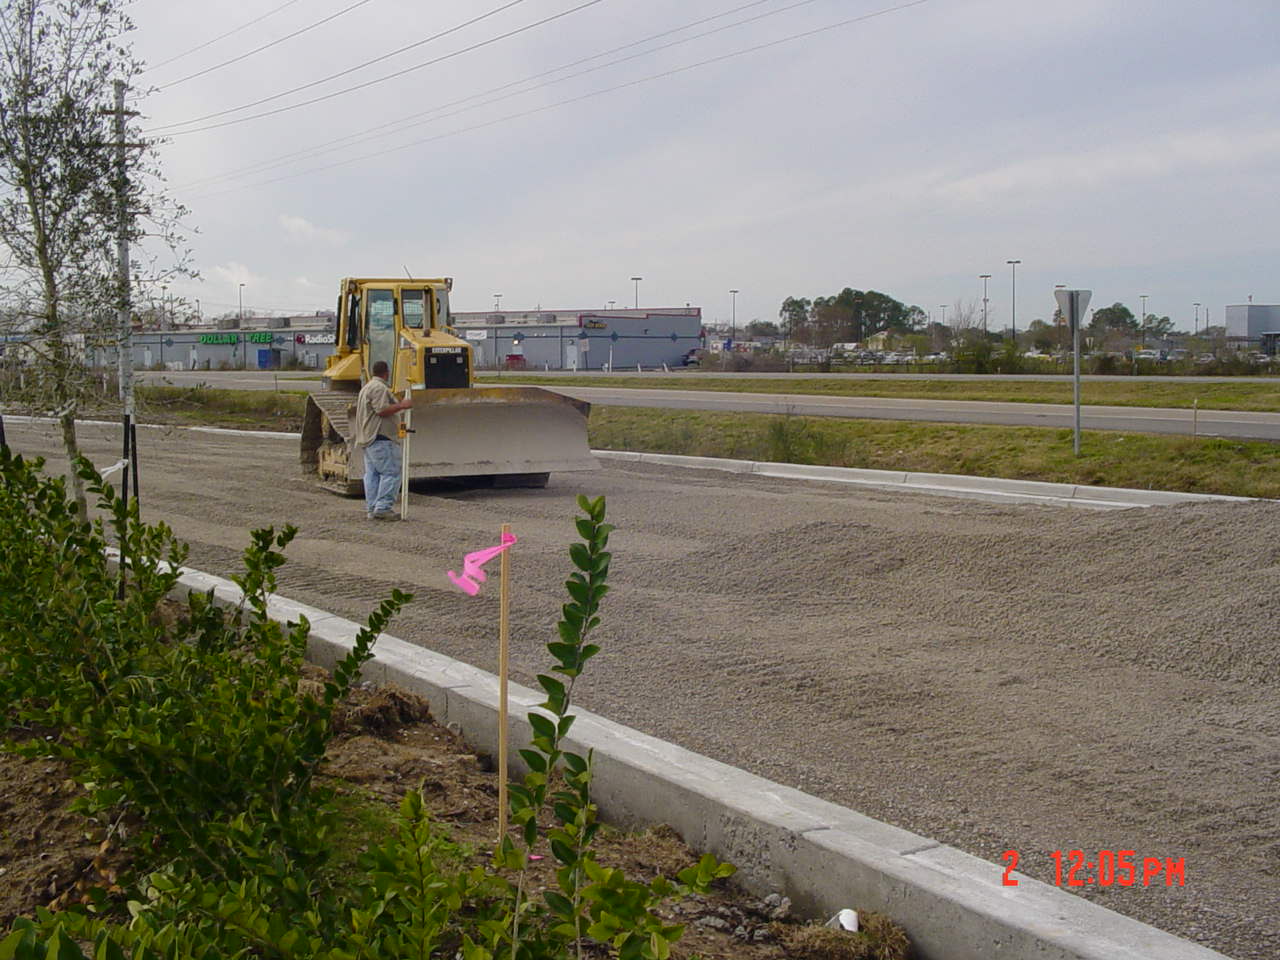 Commercial Roadway Construction